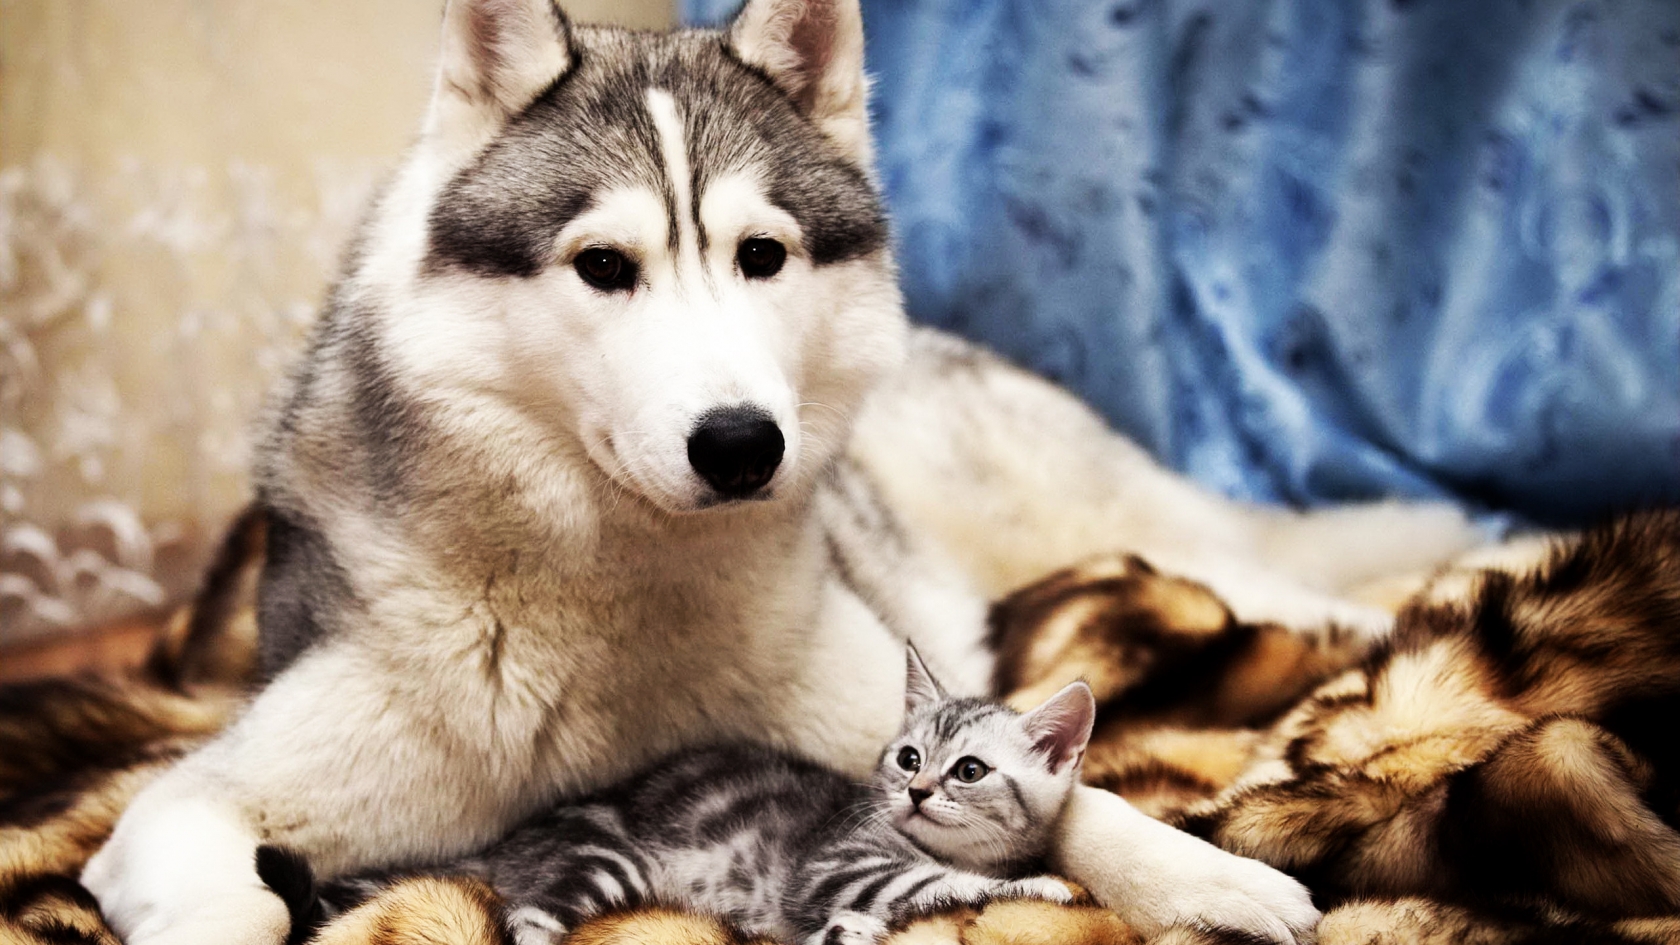 Dog and Cat Friends for 1680 x 945 HDTV resolution